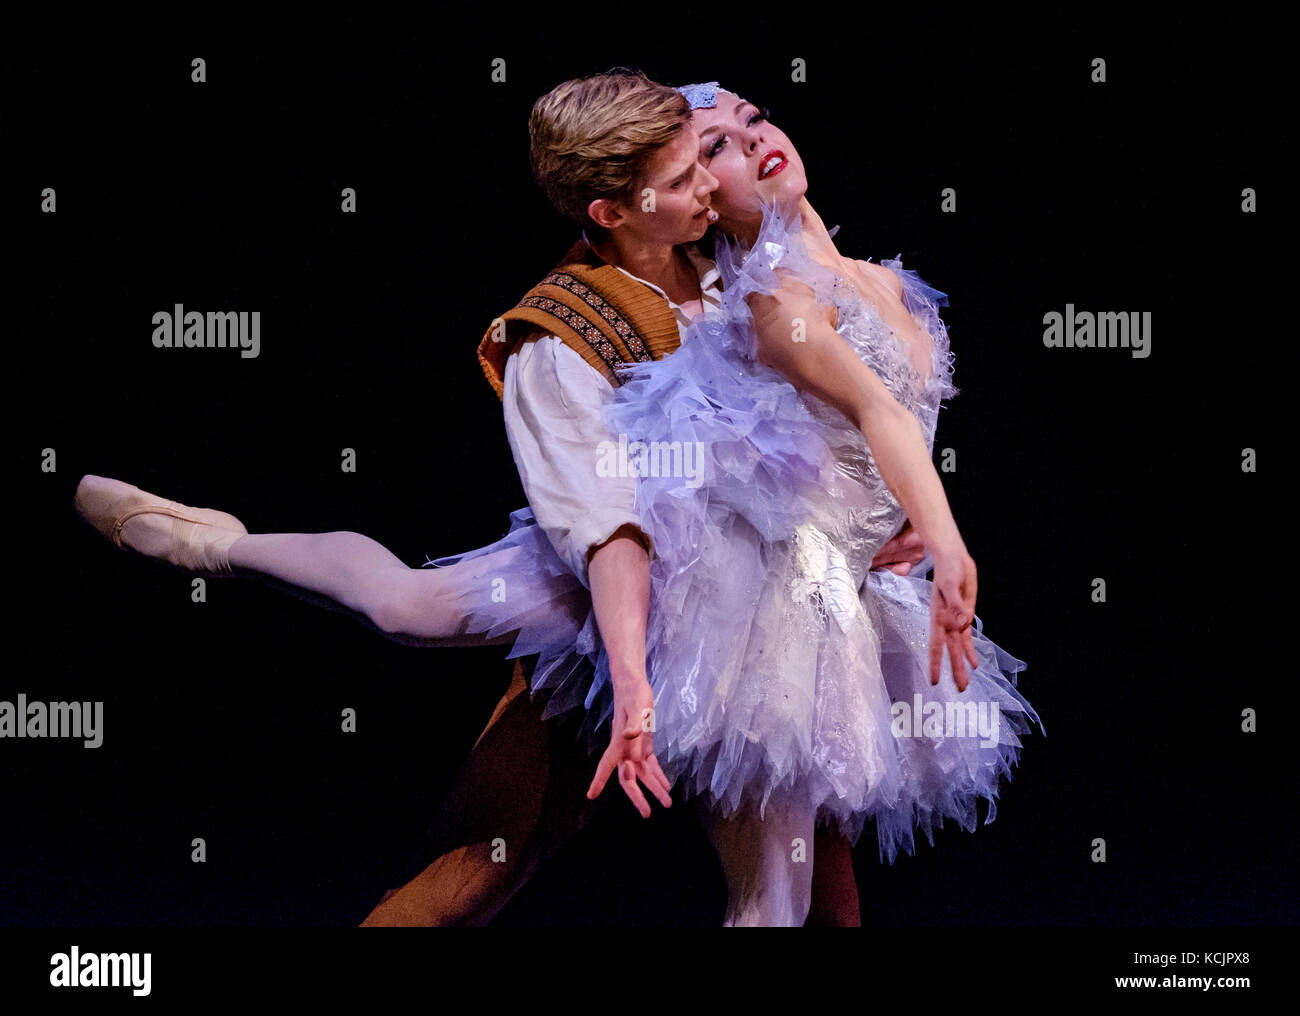 Glasgow, UK. 5th October, 2017. A scene from the SCOTTISH BALLET production of 'The Fairy's Kiss' (Le Baiser de la Fée) at the Theatre Royal, Glasgow.  Andrew Peasgood and Constance Devernay performing Kenneth MacMillan's The Fairy's Kiss.  Scottish-born choreographer Kenneth MacMillan created The Fairy’s Kiss in 1960 for The Royal Ballet, and Scottish Ballet’s revival marks the 25th anniversary of his death and its first presentation since 1986.  Inspired by Hans Christian Andersen's fairy tale The Ice Maiden, The Fairy's Kiss tells the story of a boy cursed with a kiss, destined for immortal Stock Photo